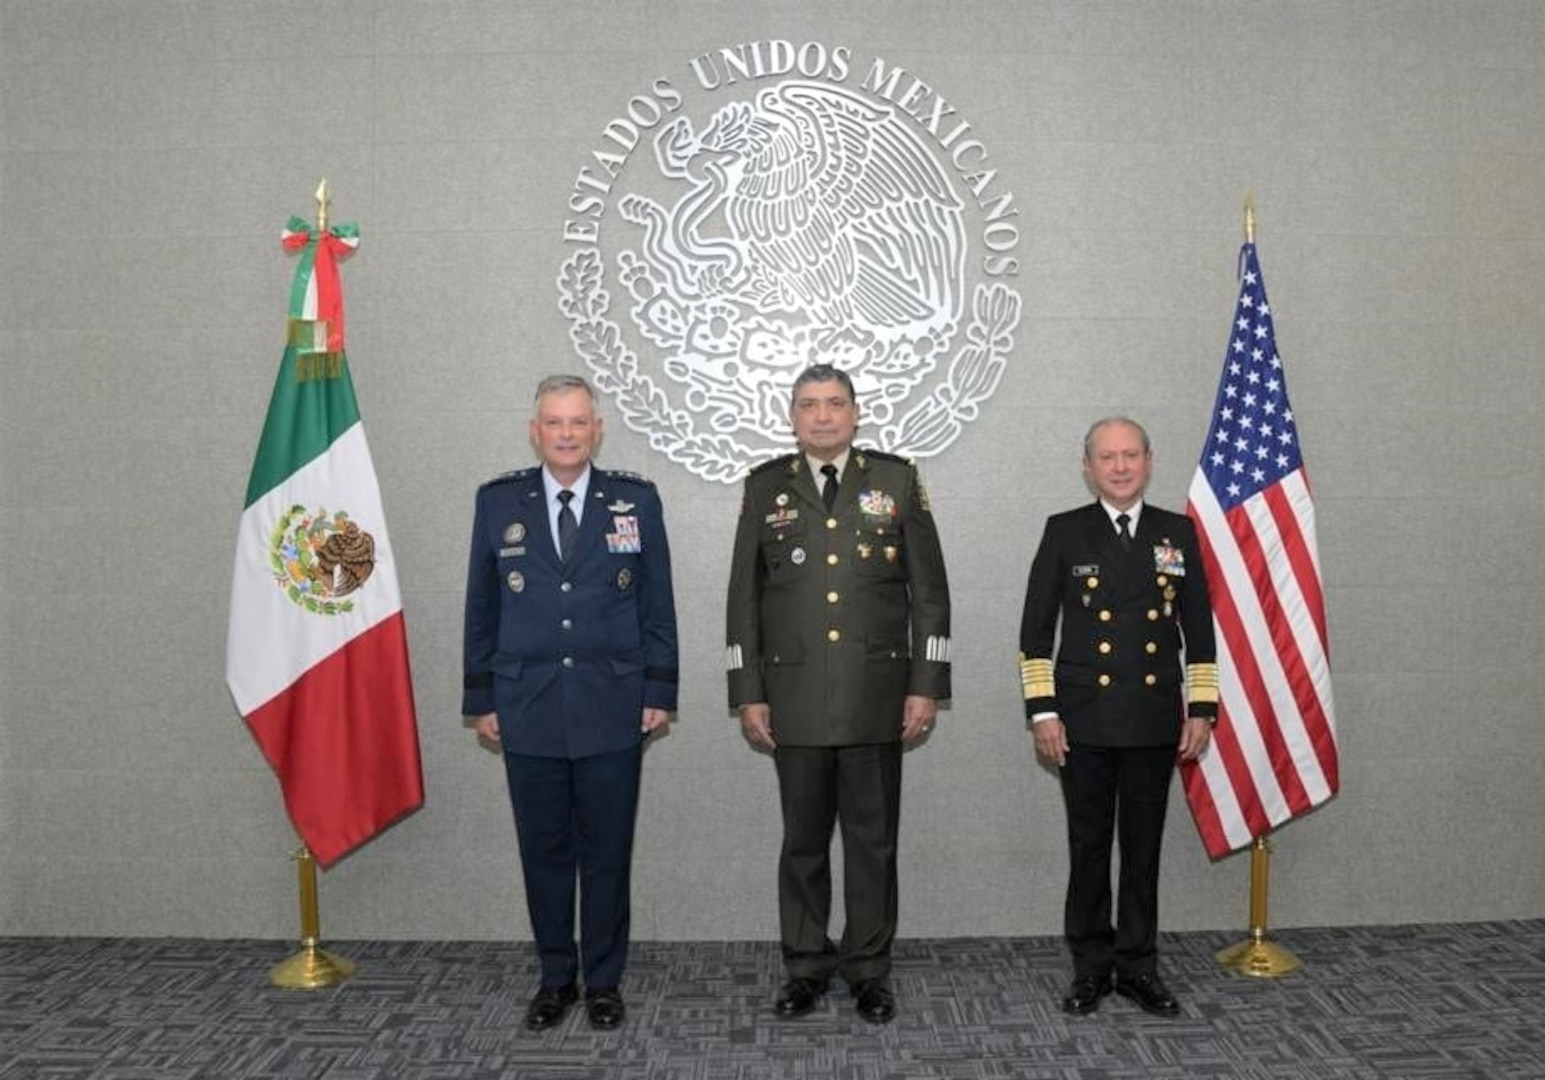 U.S. Air Force Gen. Glen D. Vanherck, commander of North American Aerospace Defense Command and U.S. Northern Command meets with Mexican Gen. Luis Cresencio Sandoval González, Secretary of the National Defense and Mexican Adm. José Rafael Ojeda Durán, Secretary of the Navy during the Feria Aeroespacial México (FAMEX), or the Mexico Aerospace Fair, at Base Aérea No.1 de Santa Lucía, Mexico, Sep. 22, 2021. The U.S. participated in the air show as the “country of honor,” a special designation signifying the partnership and cooperation between both countries.